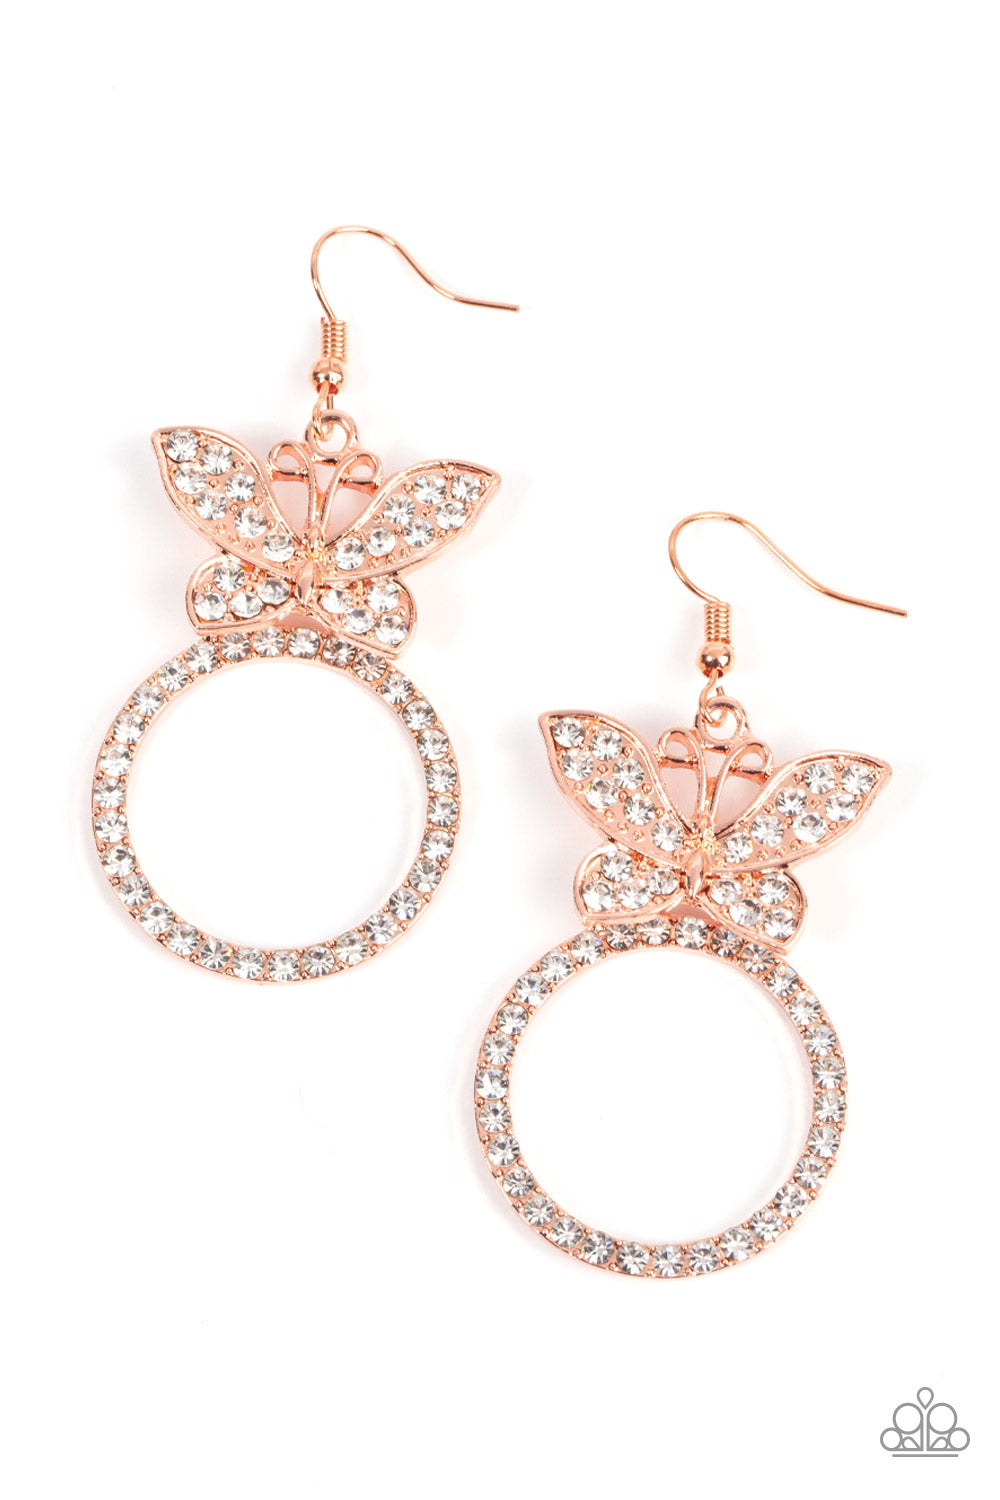 A white rhinestone encrusted shiny copper butterfly flutters atop a shiny copper ring dotted in matching white rhinestones, resulting in a dazzling statement piece. Earring attaches to a standard fishhook fitting.